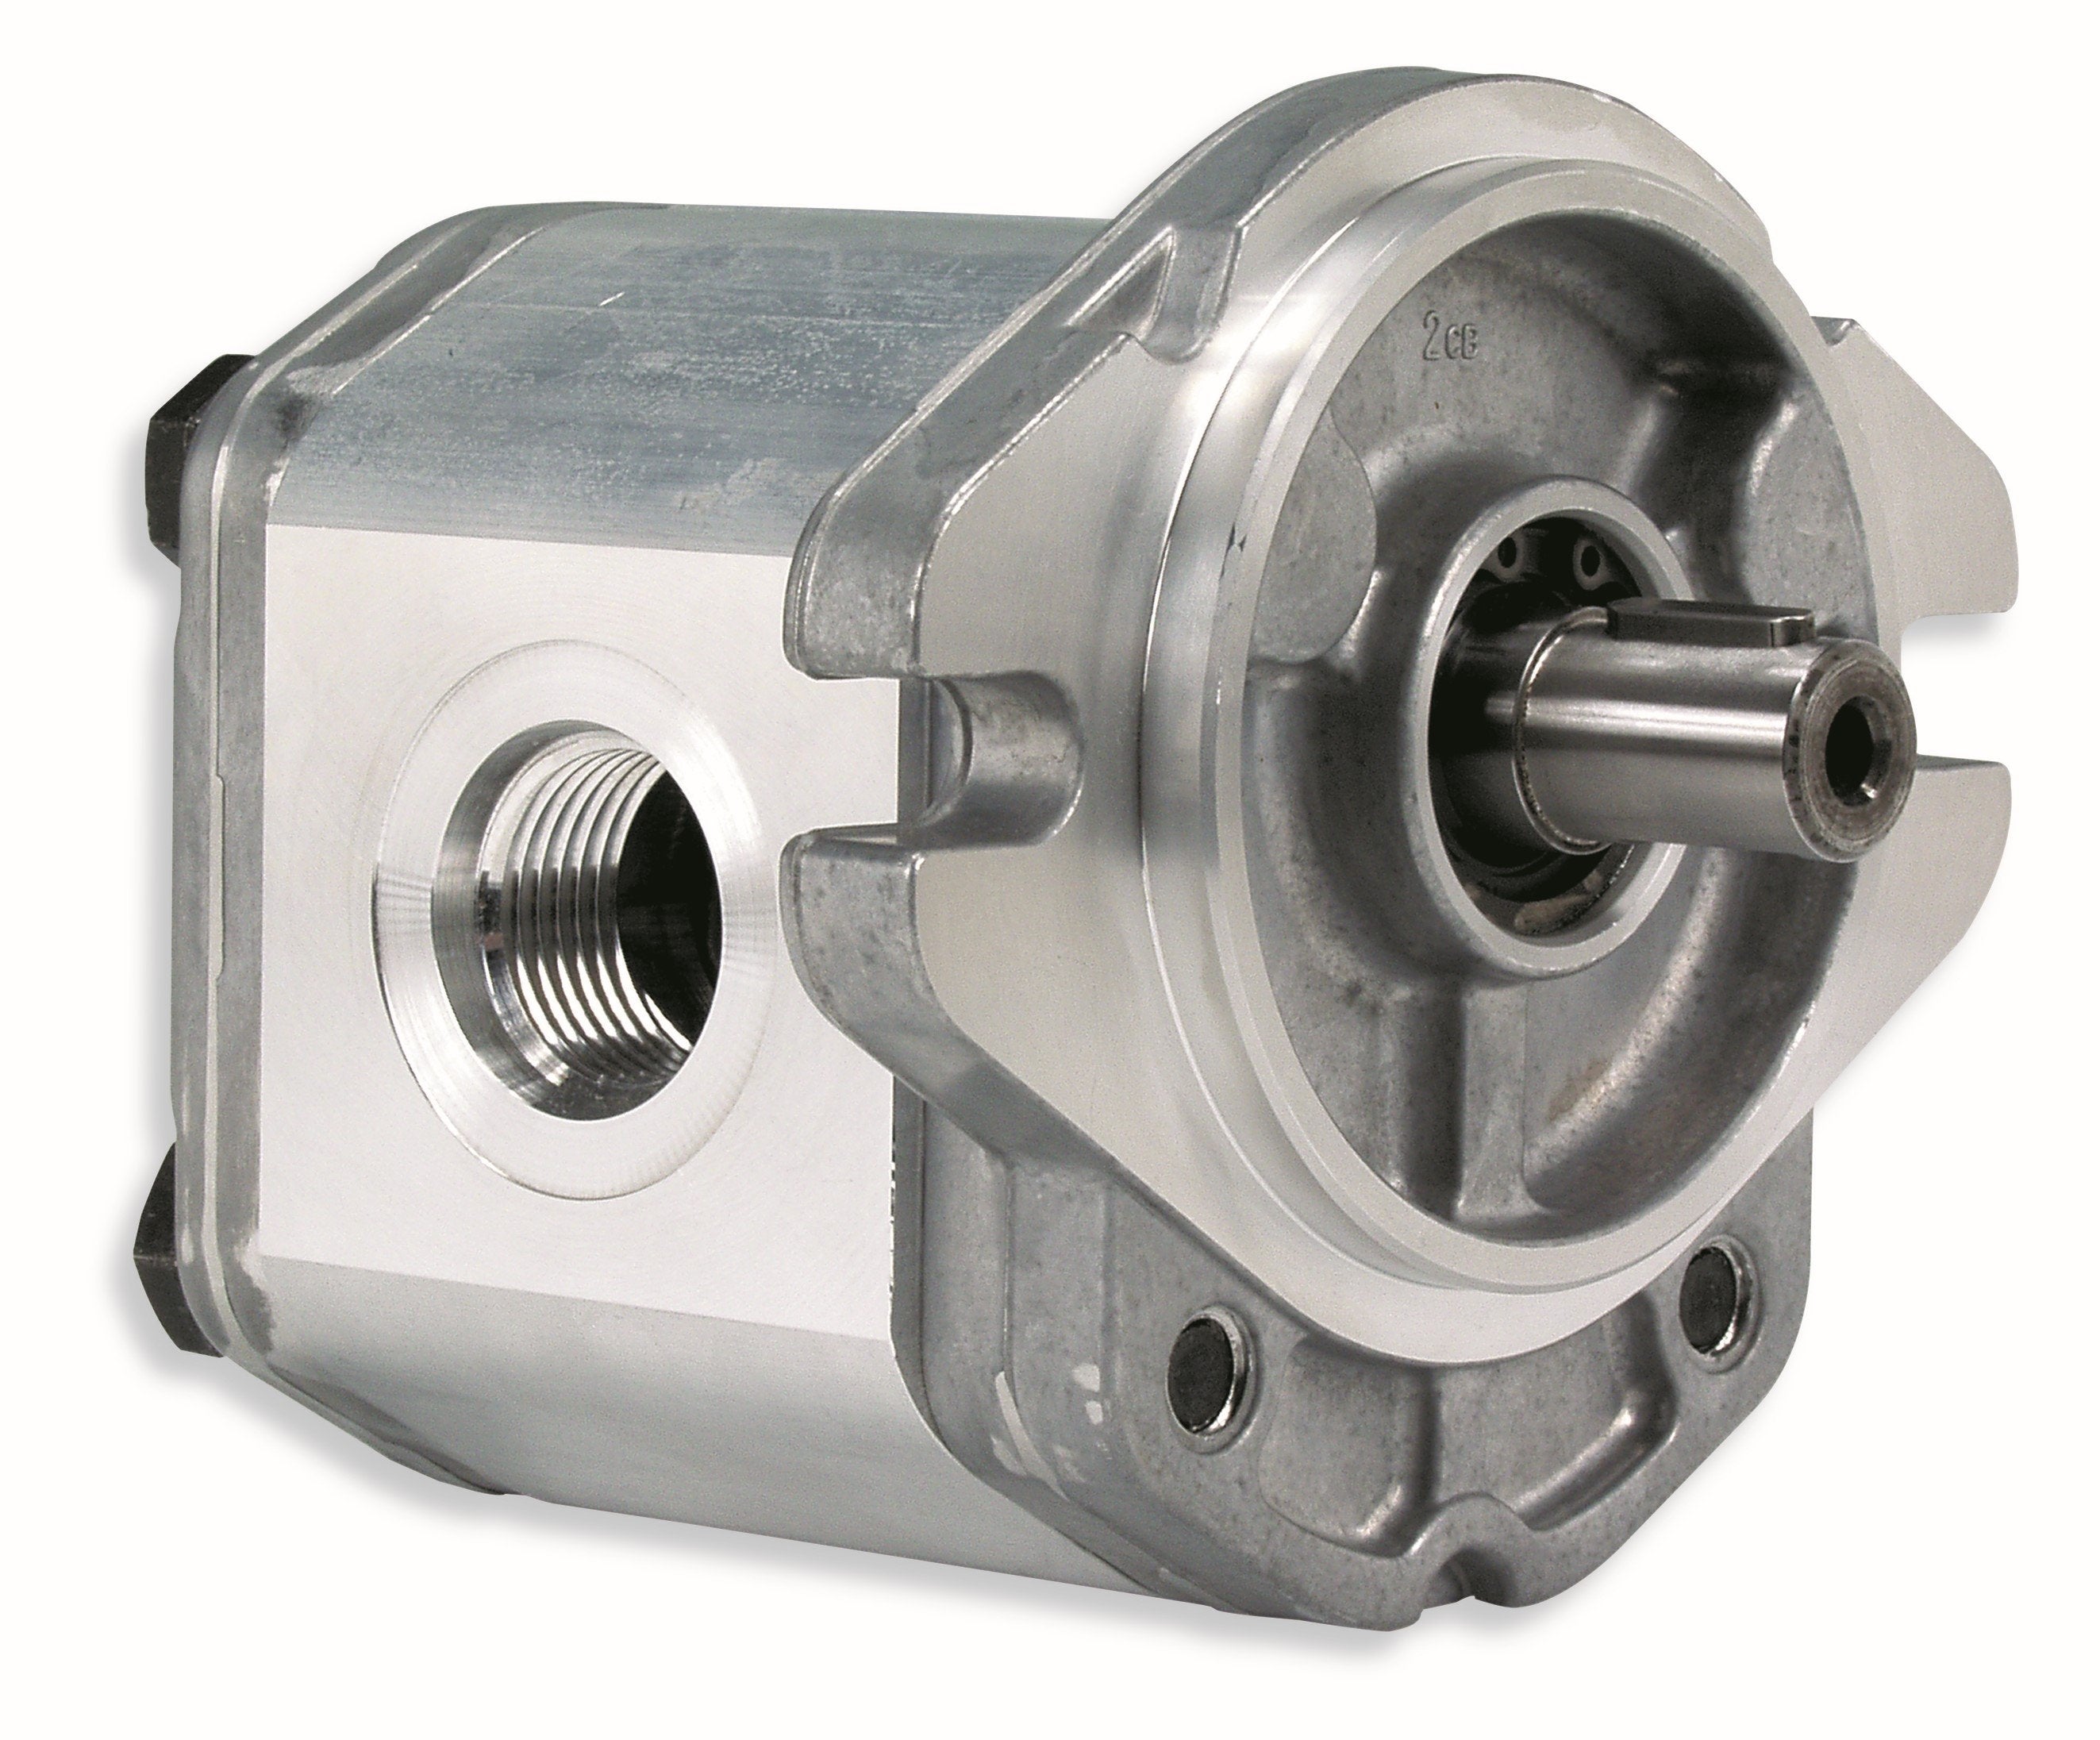 GHM2A-R-20-S1-E2 : Marzocchi Gear Motor, Bidirectional, 14.1cc, 3770psi rated, 3200RPM, 0.75 (3/4") #12 SAE ports, 9T 16/32DP Splined Shaft